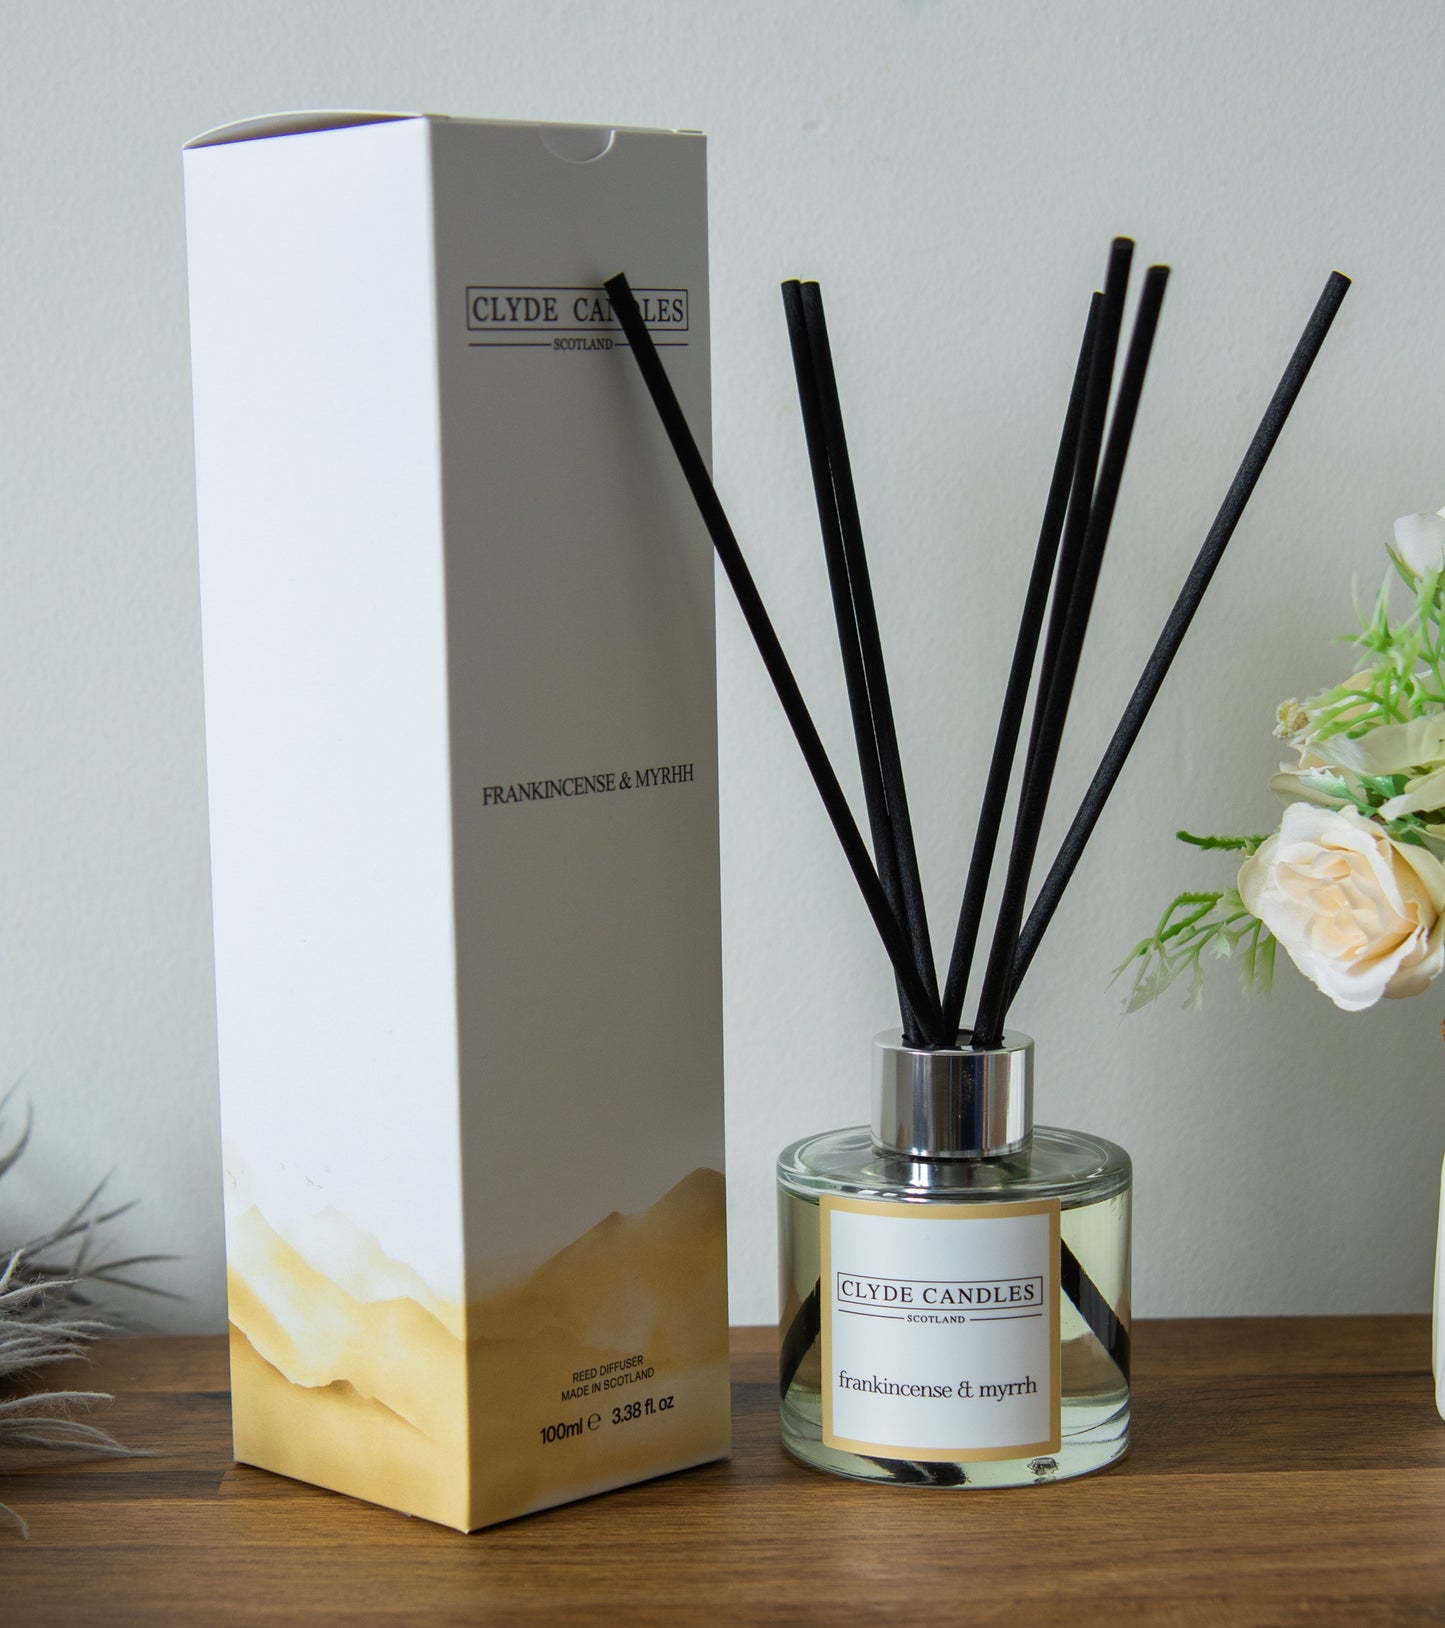 Frankincense & Myrrh Reed Diffuser - Clyde Candles, Luxury Diffuser Oil with a Set of 7 Fibre Sticks, 100ml, Best Aroma Scent for Home, Kitchen, Living Room, Bathroom. Fragrance Diffusers set with sticks